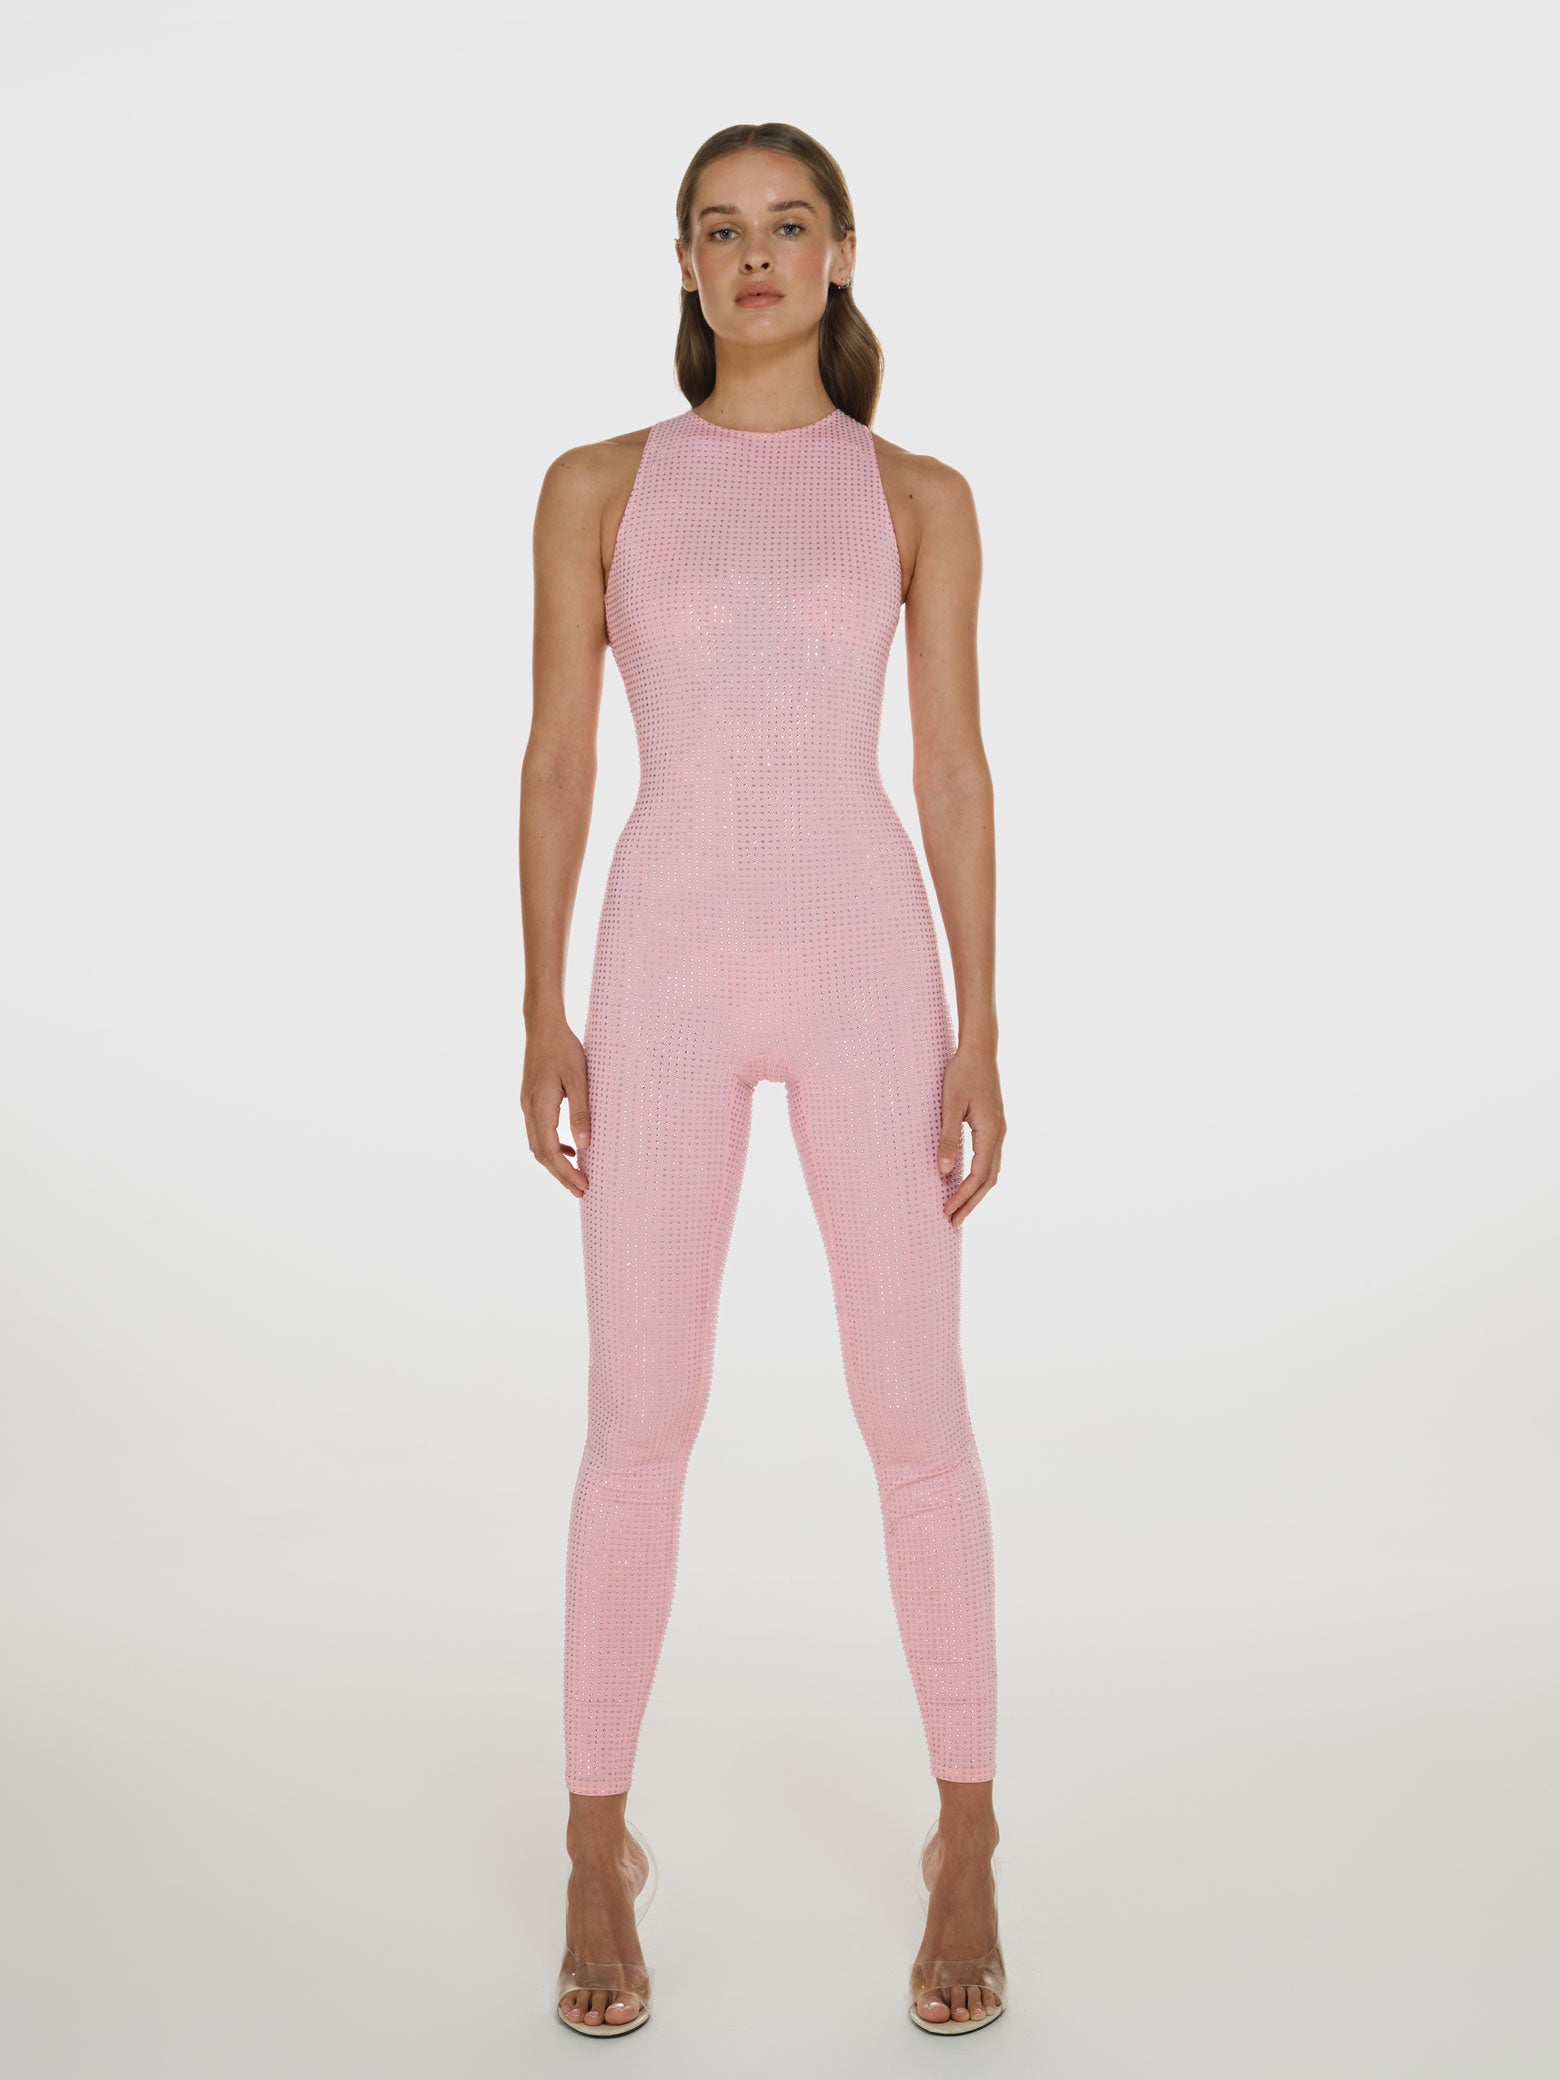 Full shot of a girl in a pink sleeveless jumpsuit decorated with Swarovski crystals